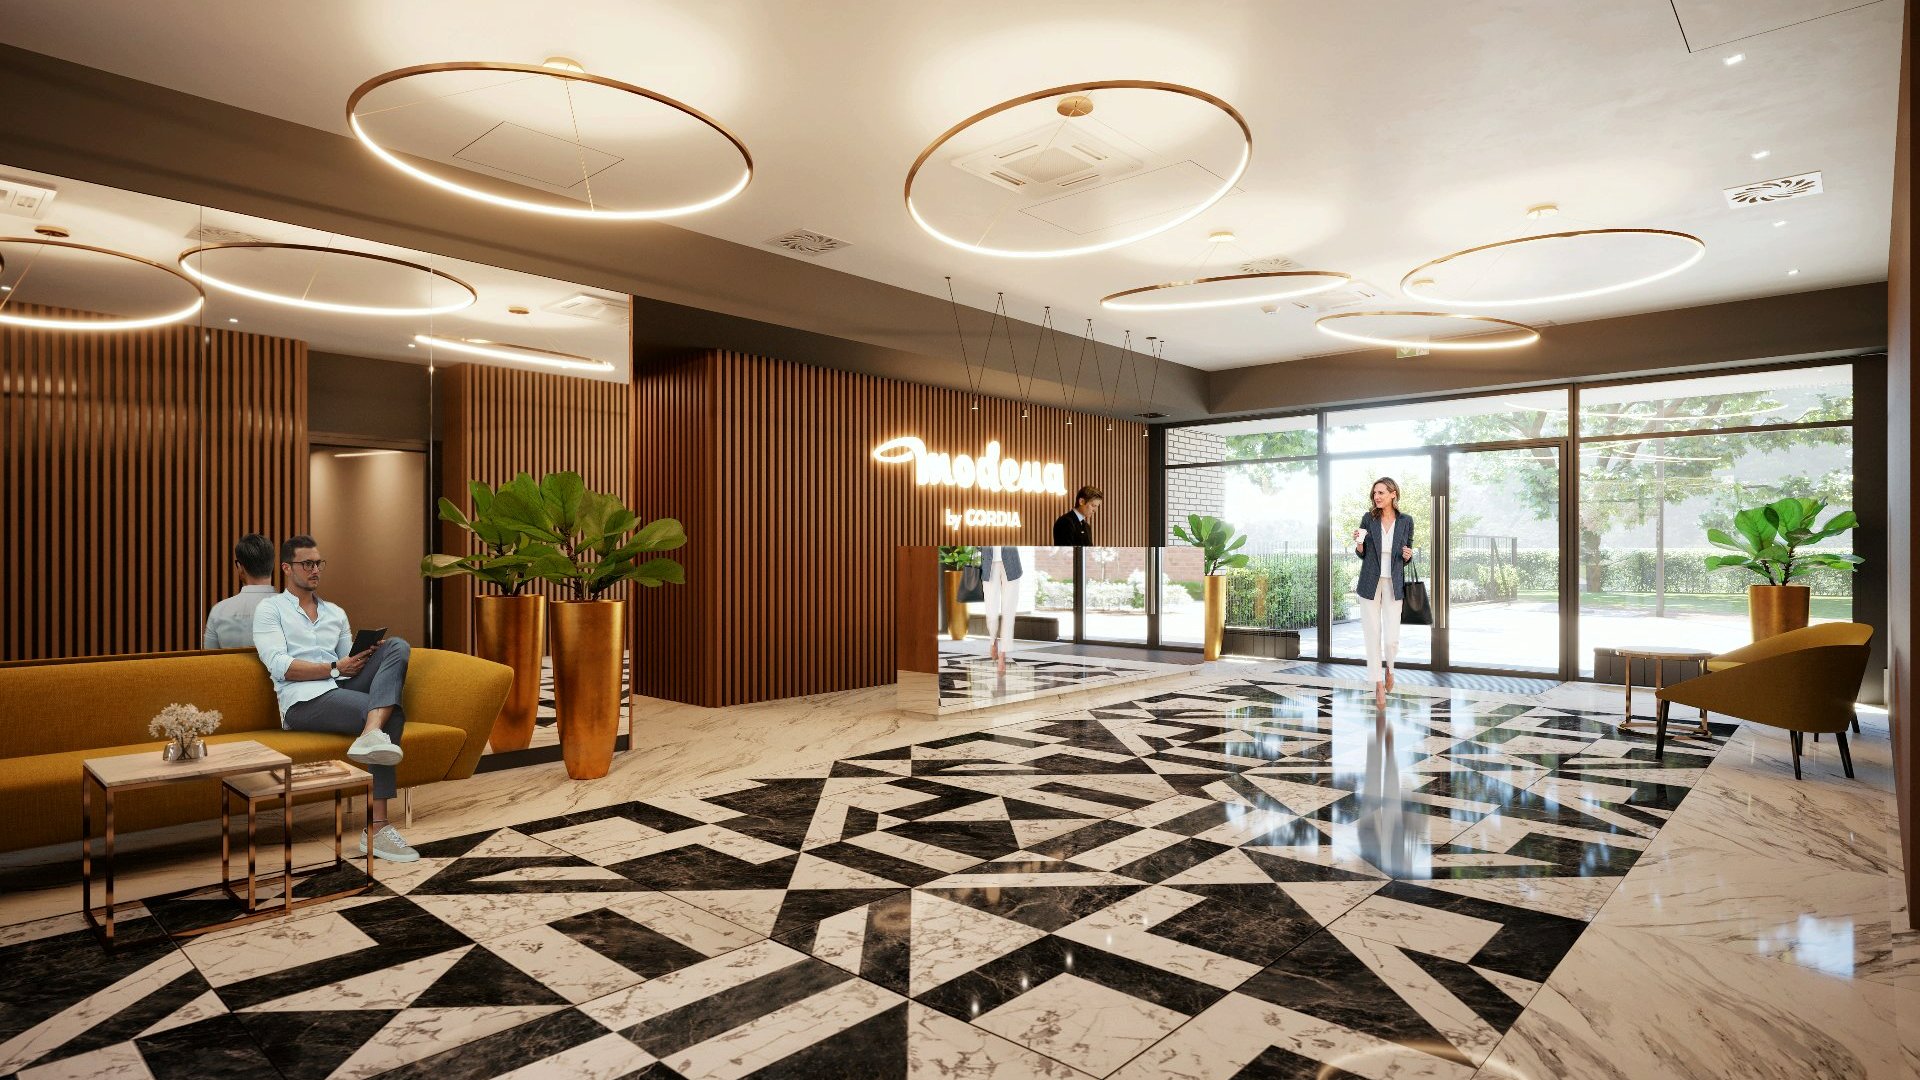 The image shows a visualisation of the main lobby inside the Modena development. In the lobby there is a reception desk with staff. Next to it, a man is sitting on a sofa.